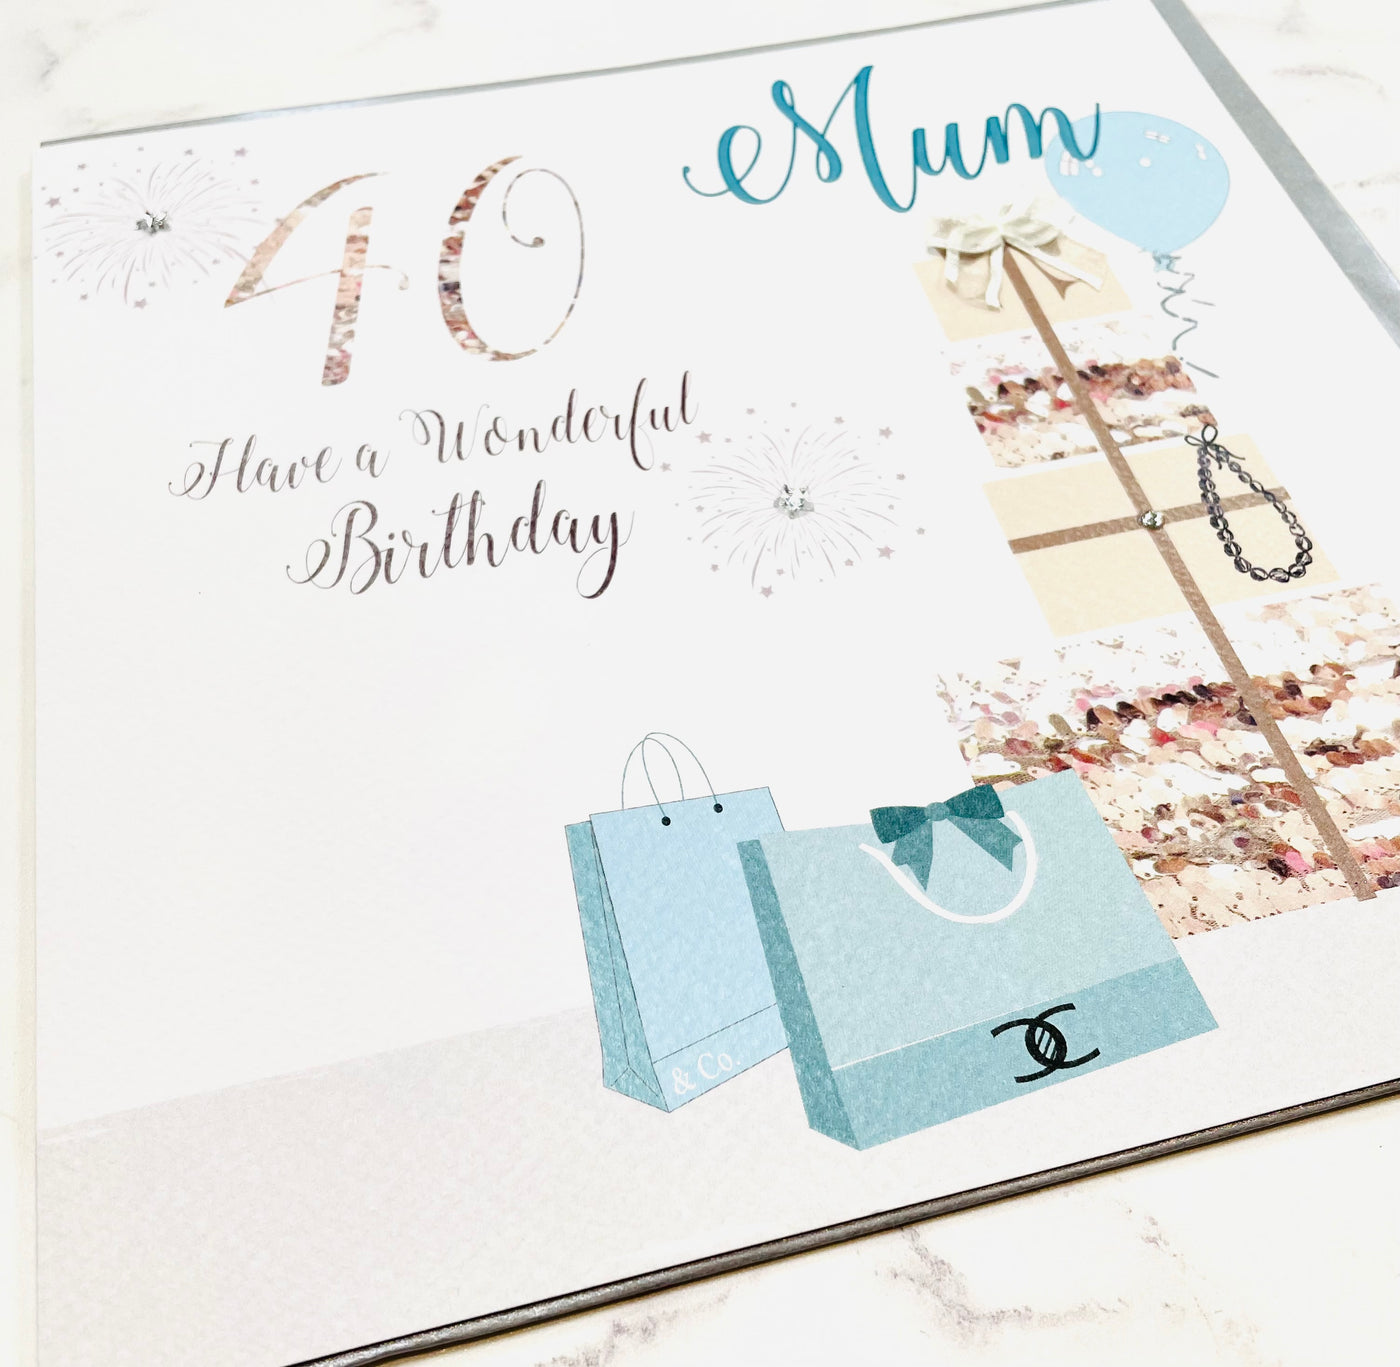 White Cotton Cards LARGE Mum 40th Birthday Presents Card